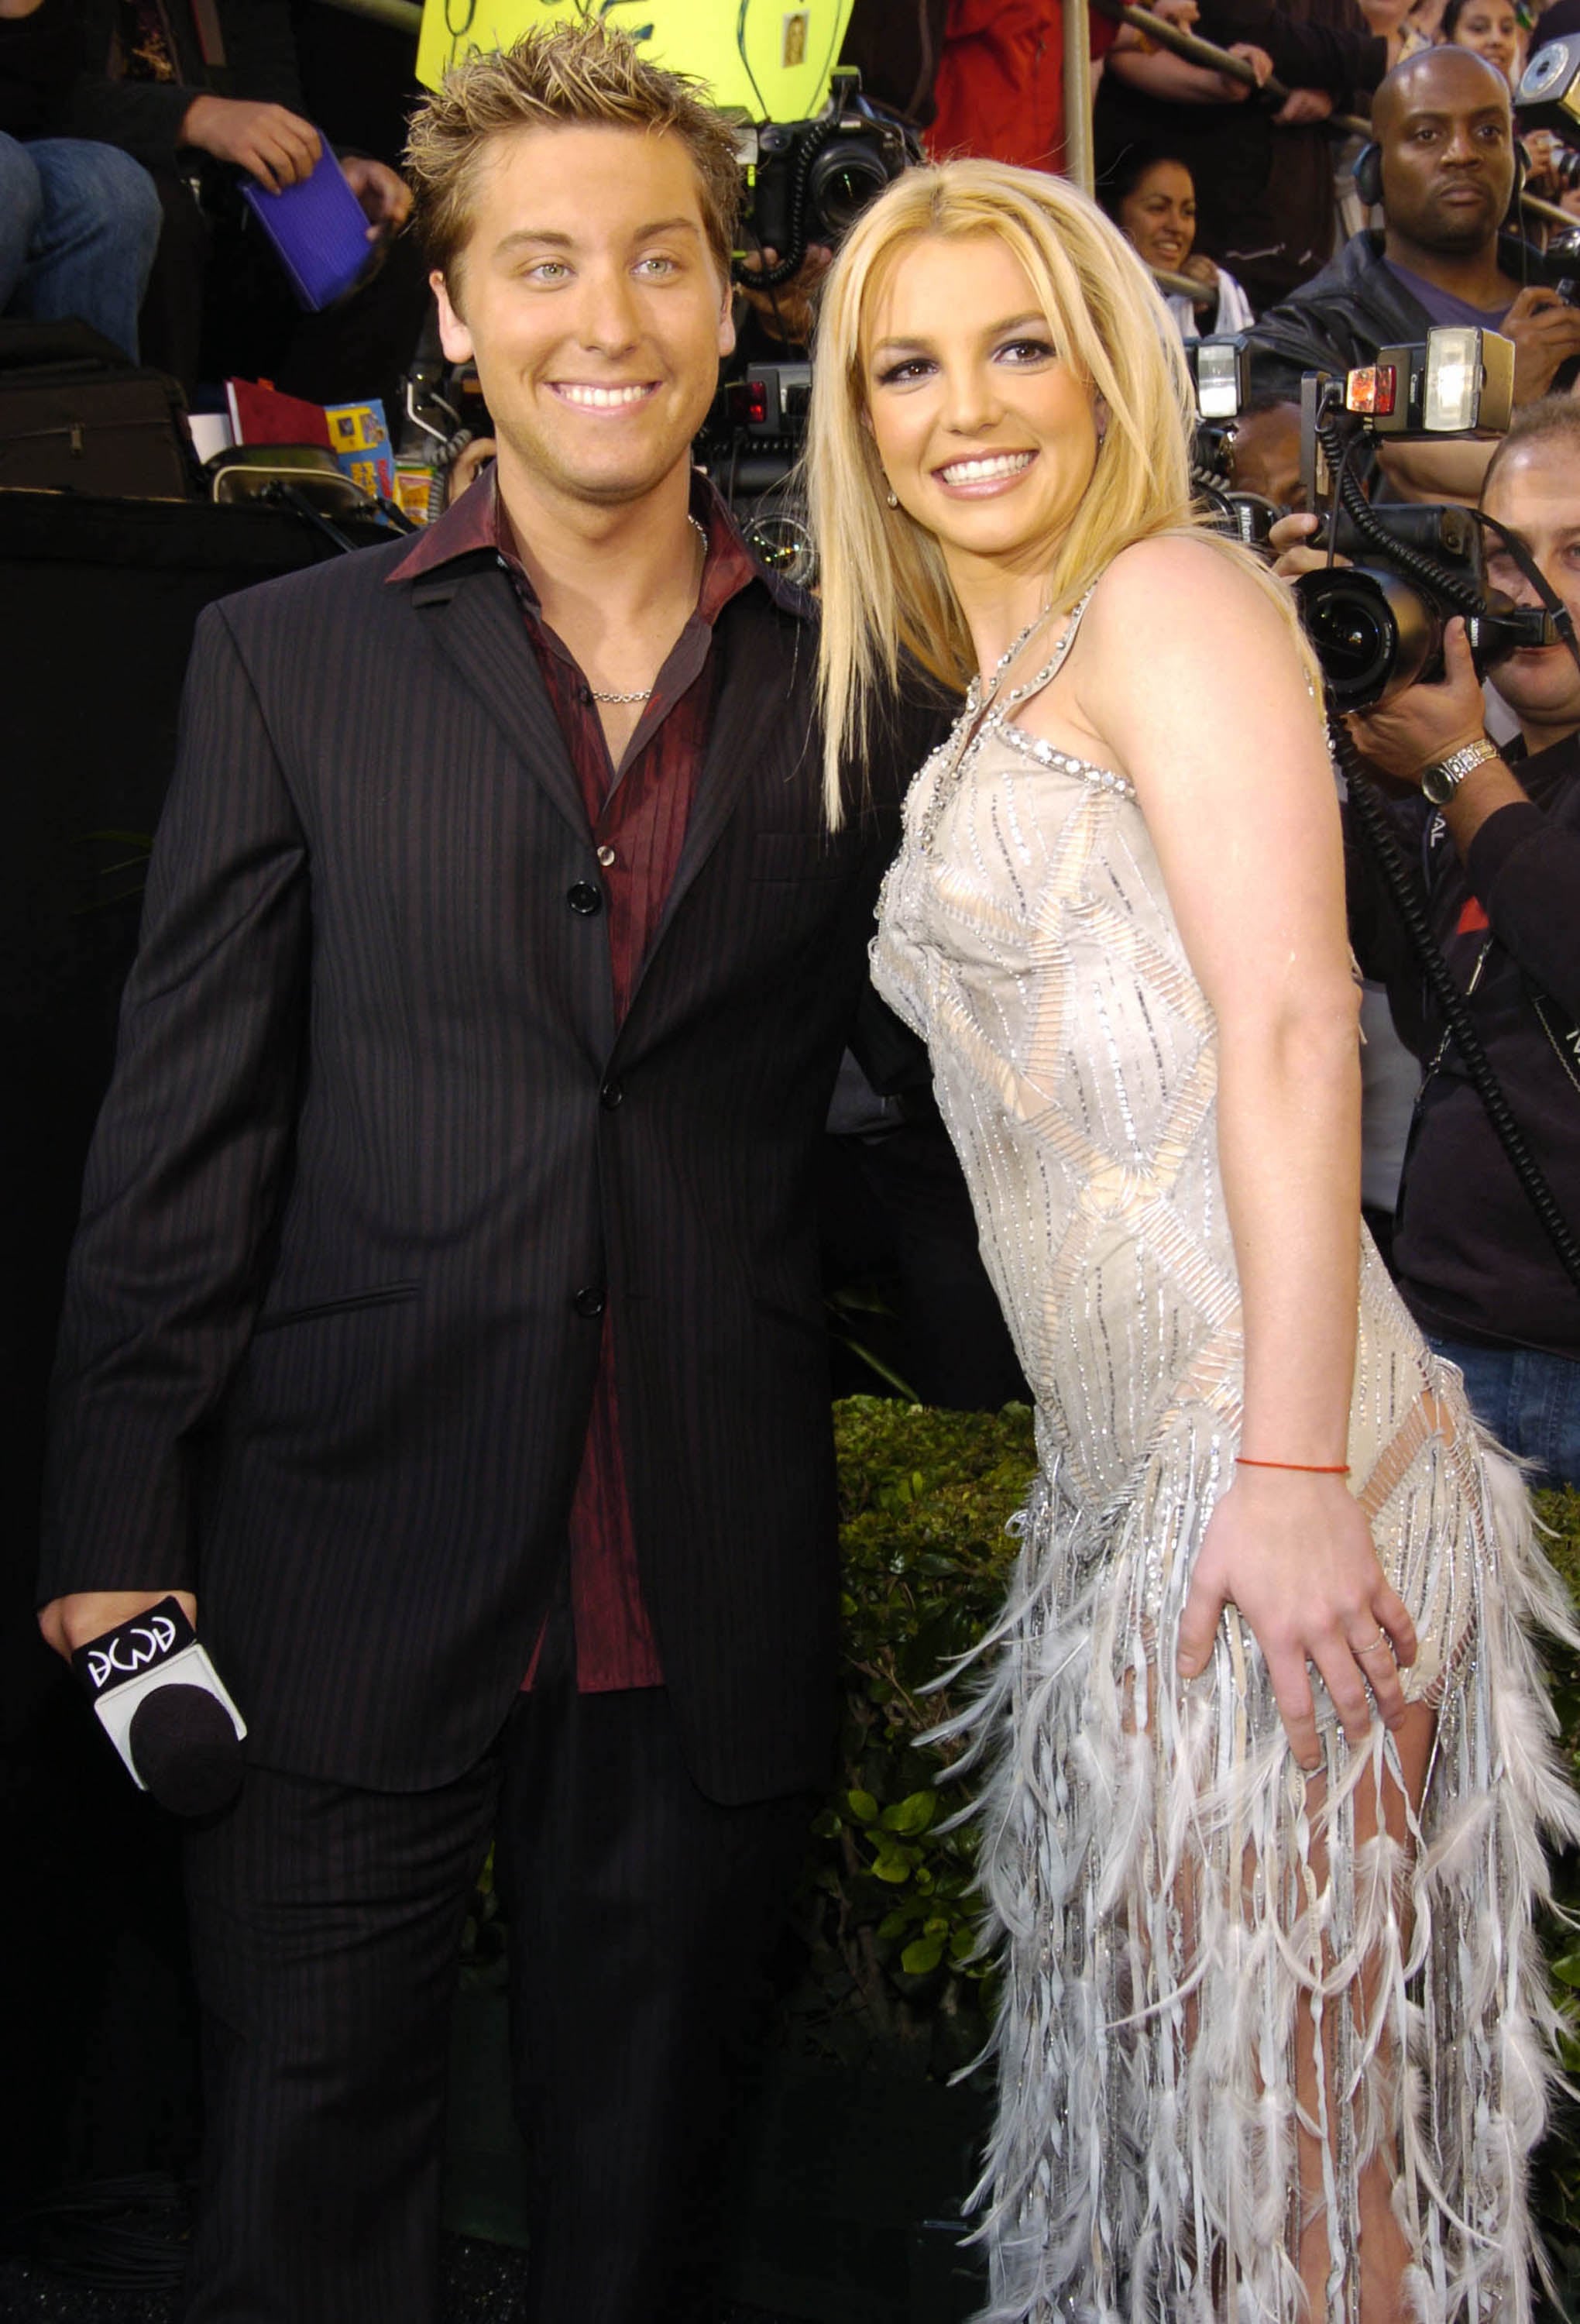 Lance Bass and Britney Spears during 31st Annual American Music Awards - Arrivals at Shrine Auditorium in Los Angeles, California, United States. (Photo by KMazur/WireImage)